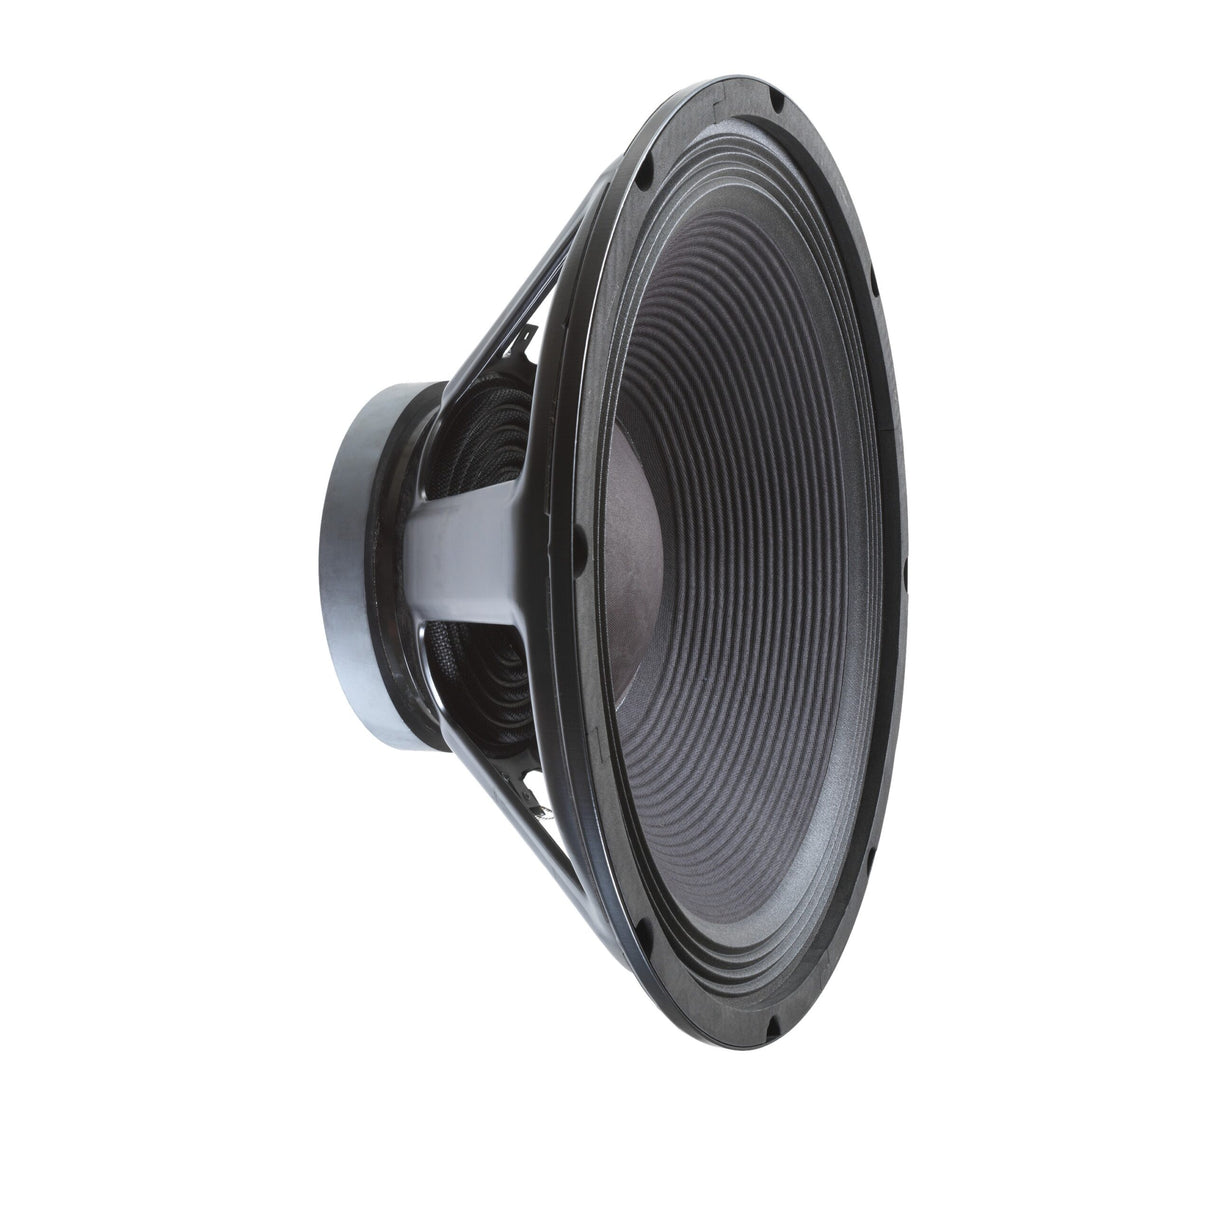 JBL EON718S 18-Inch Powered PA Subwoofer